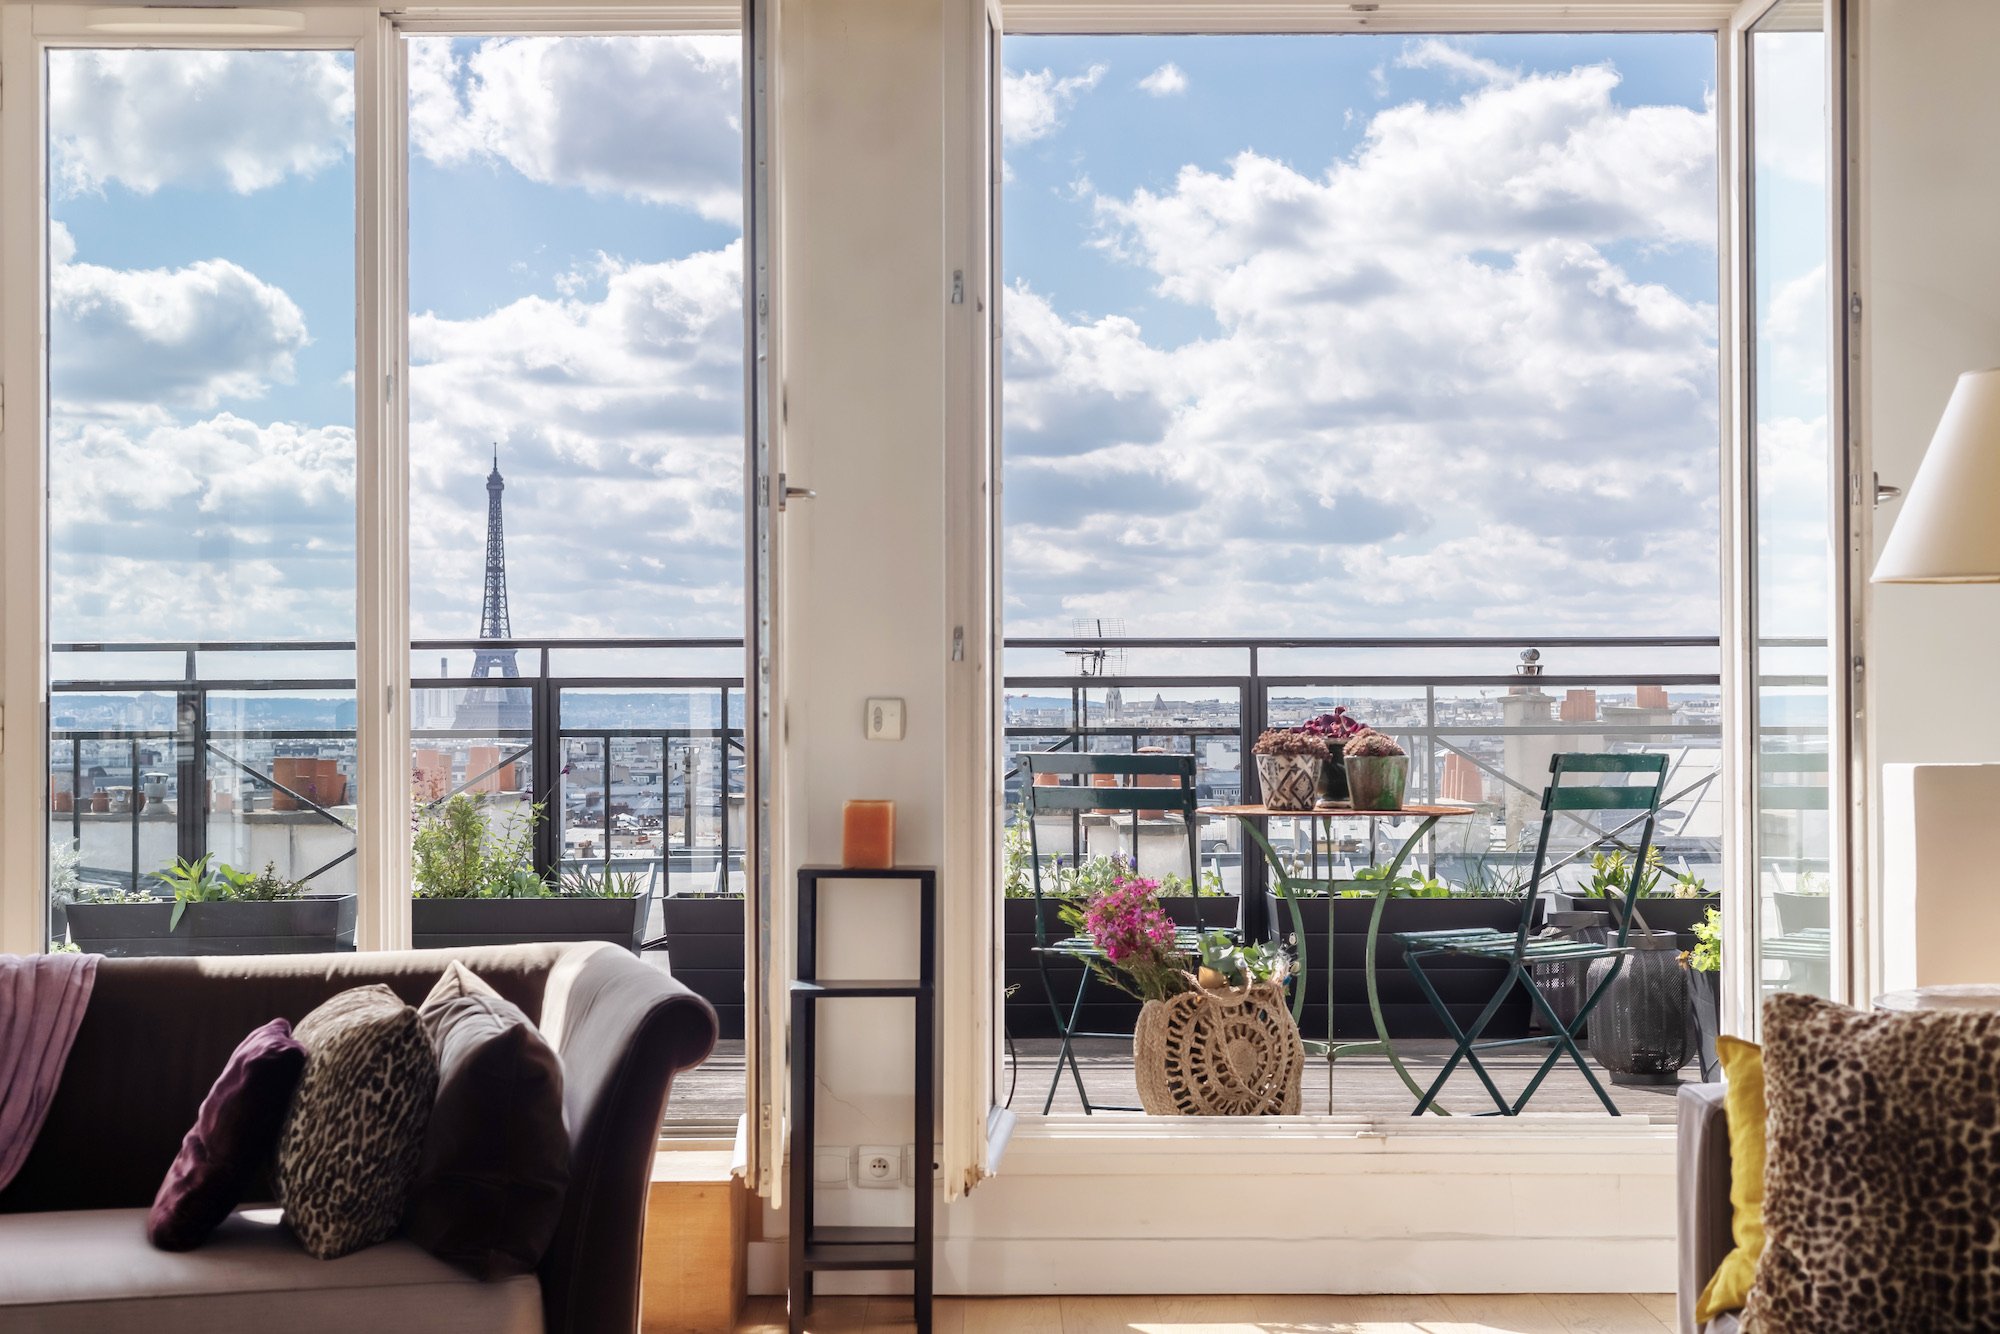 Luxury apartment in Paris with rooftop view of the Eiffel Tower and central Paris